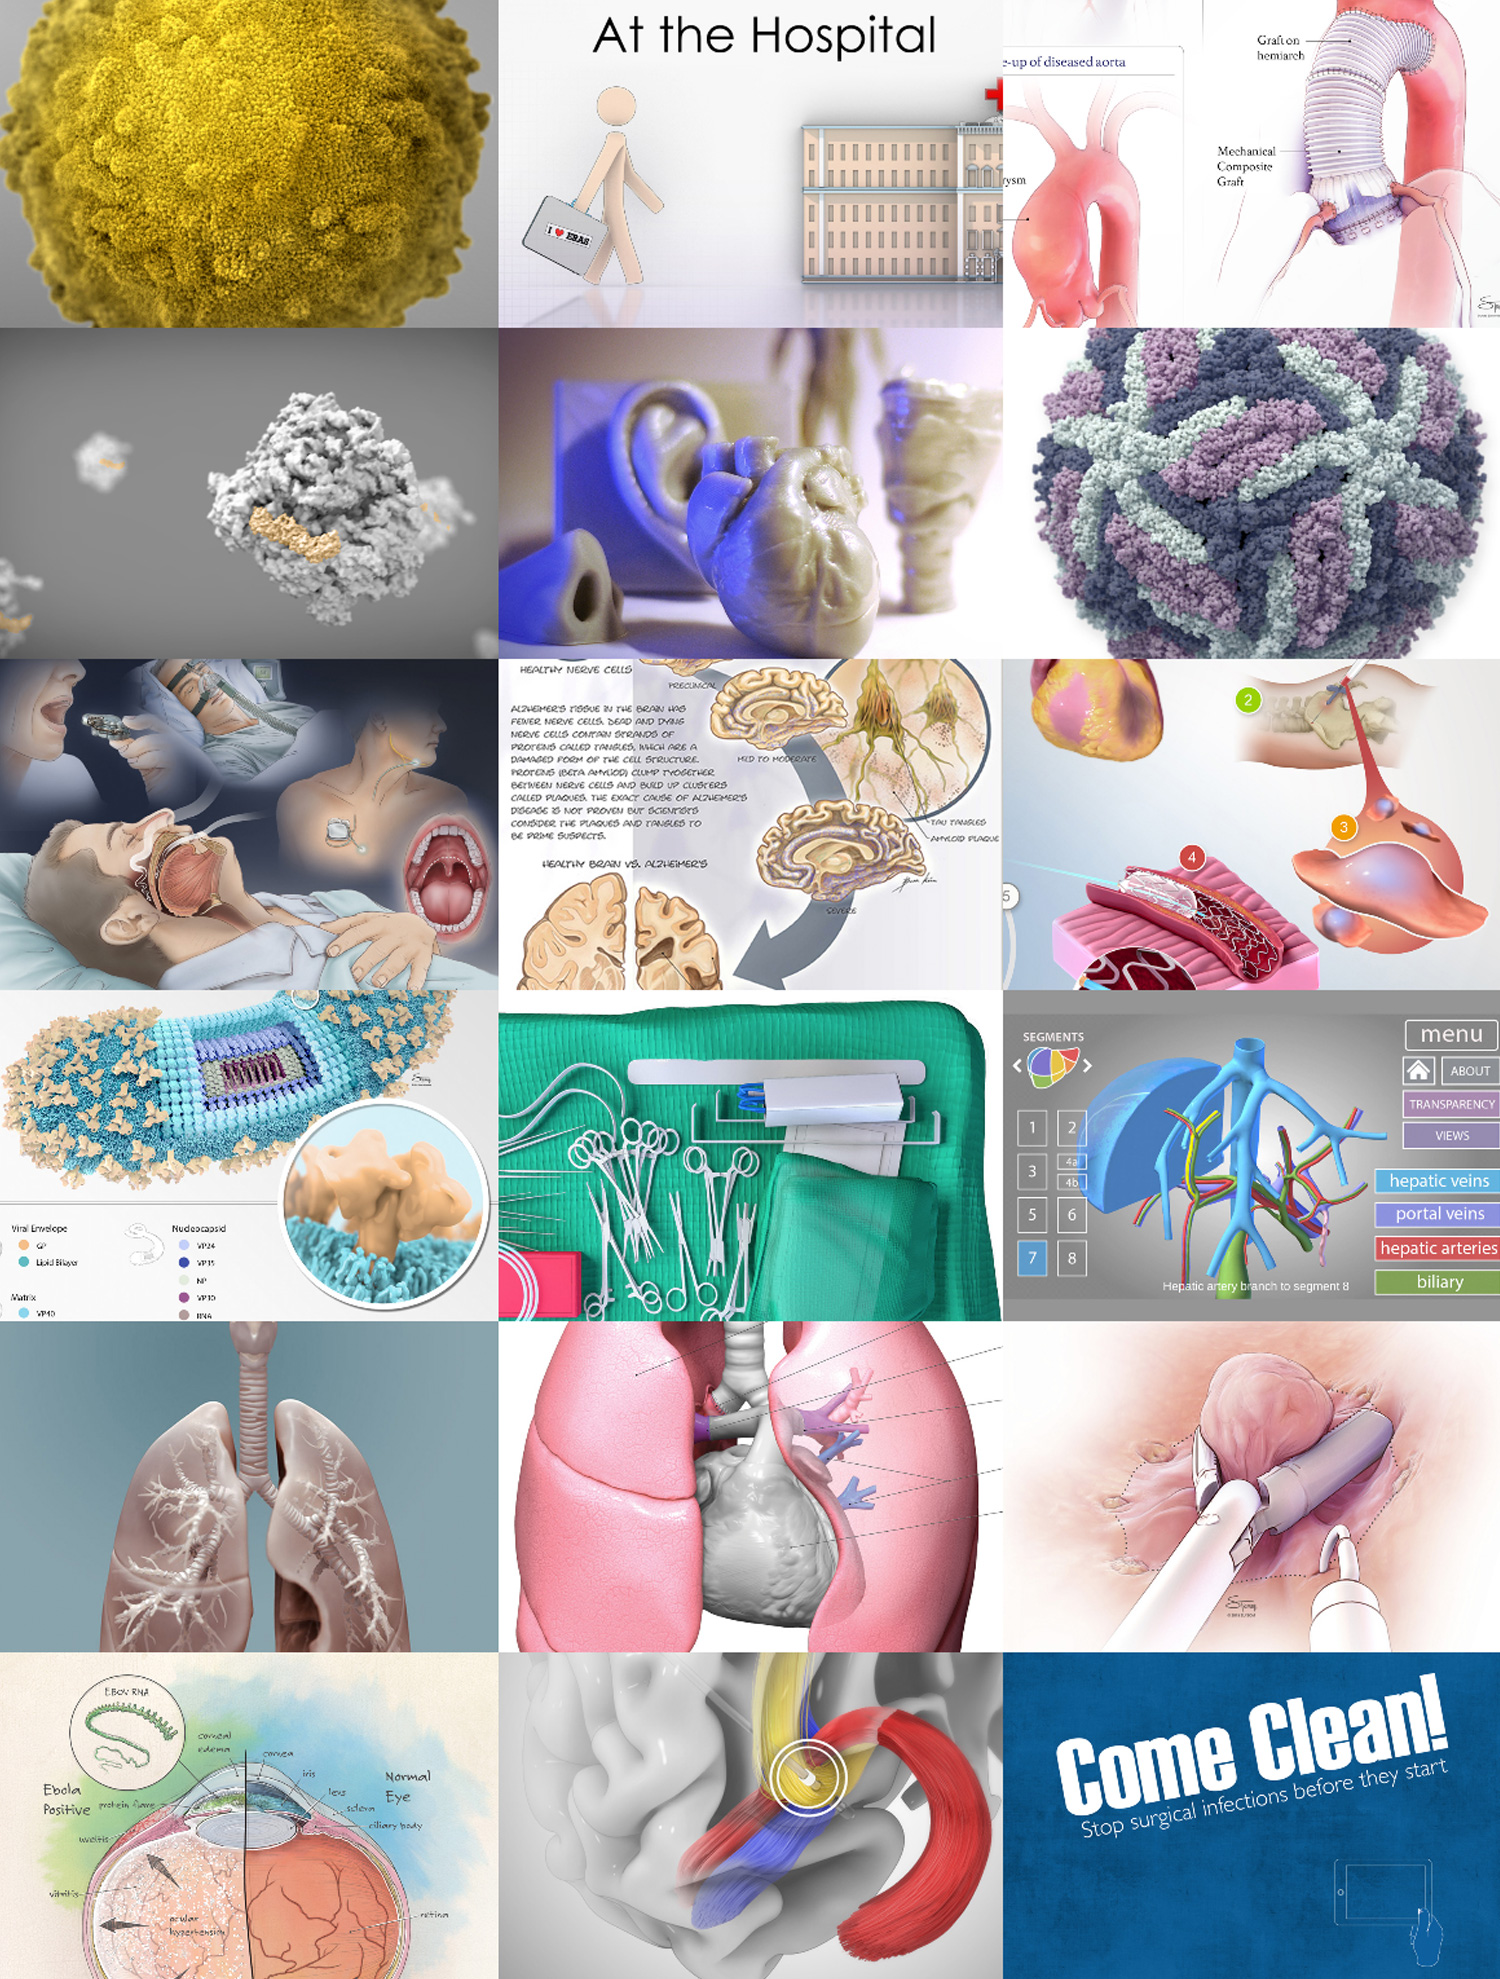 Visual Medical Education project archive.